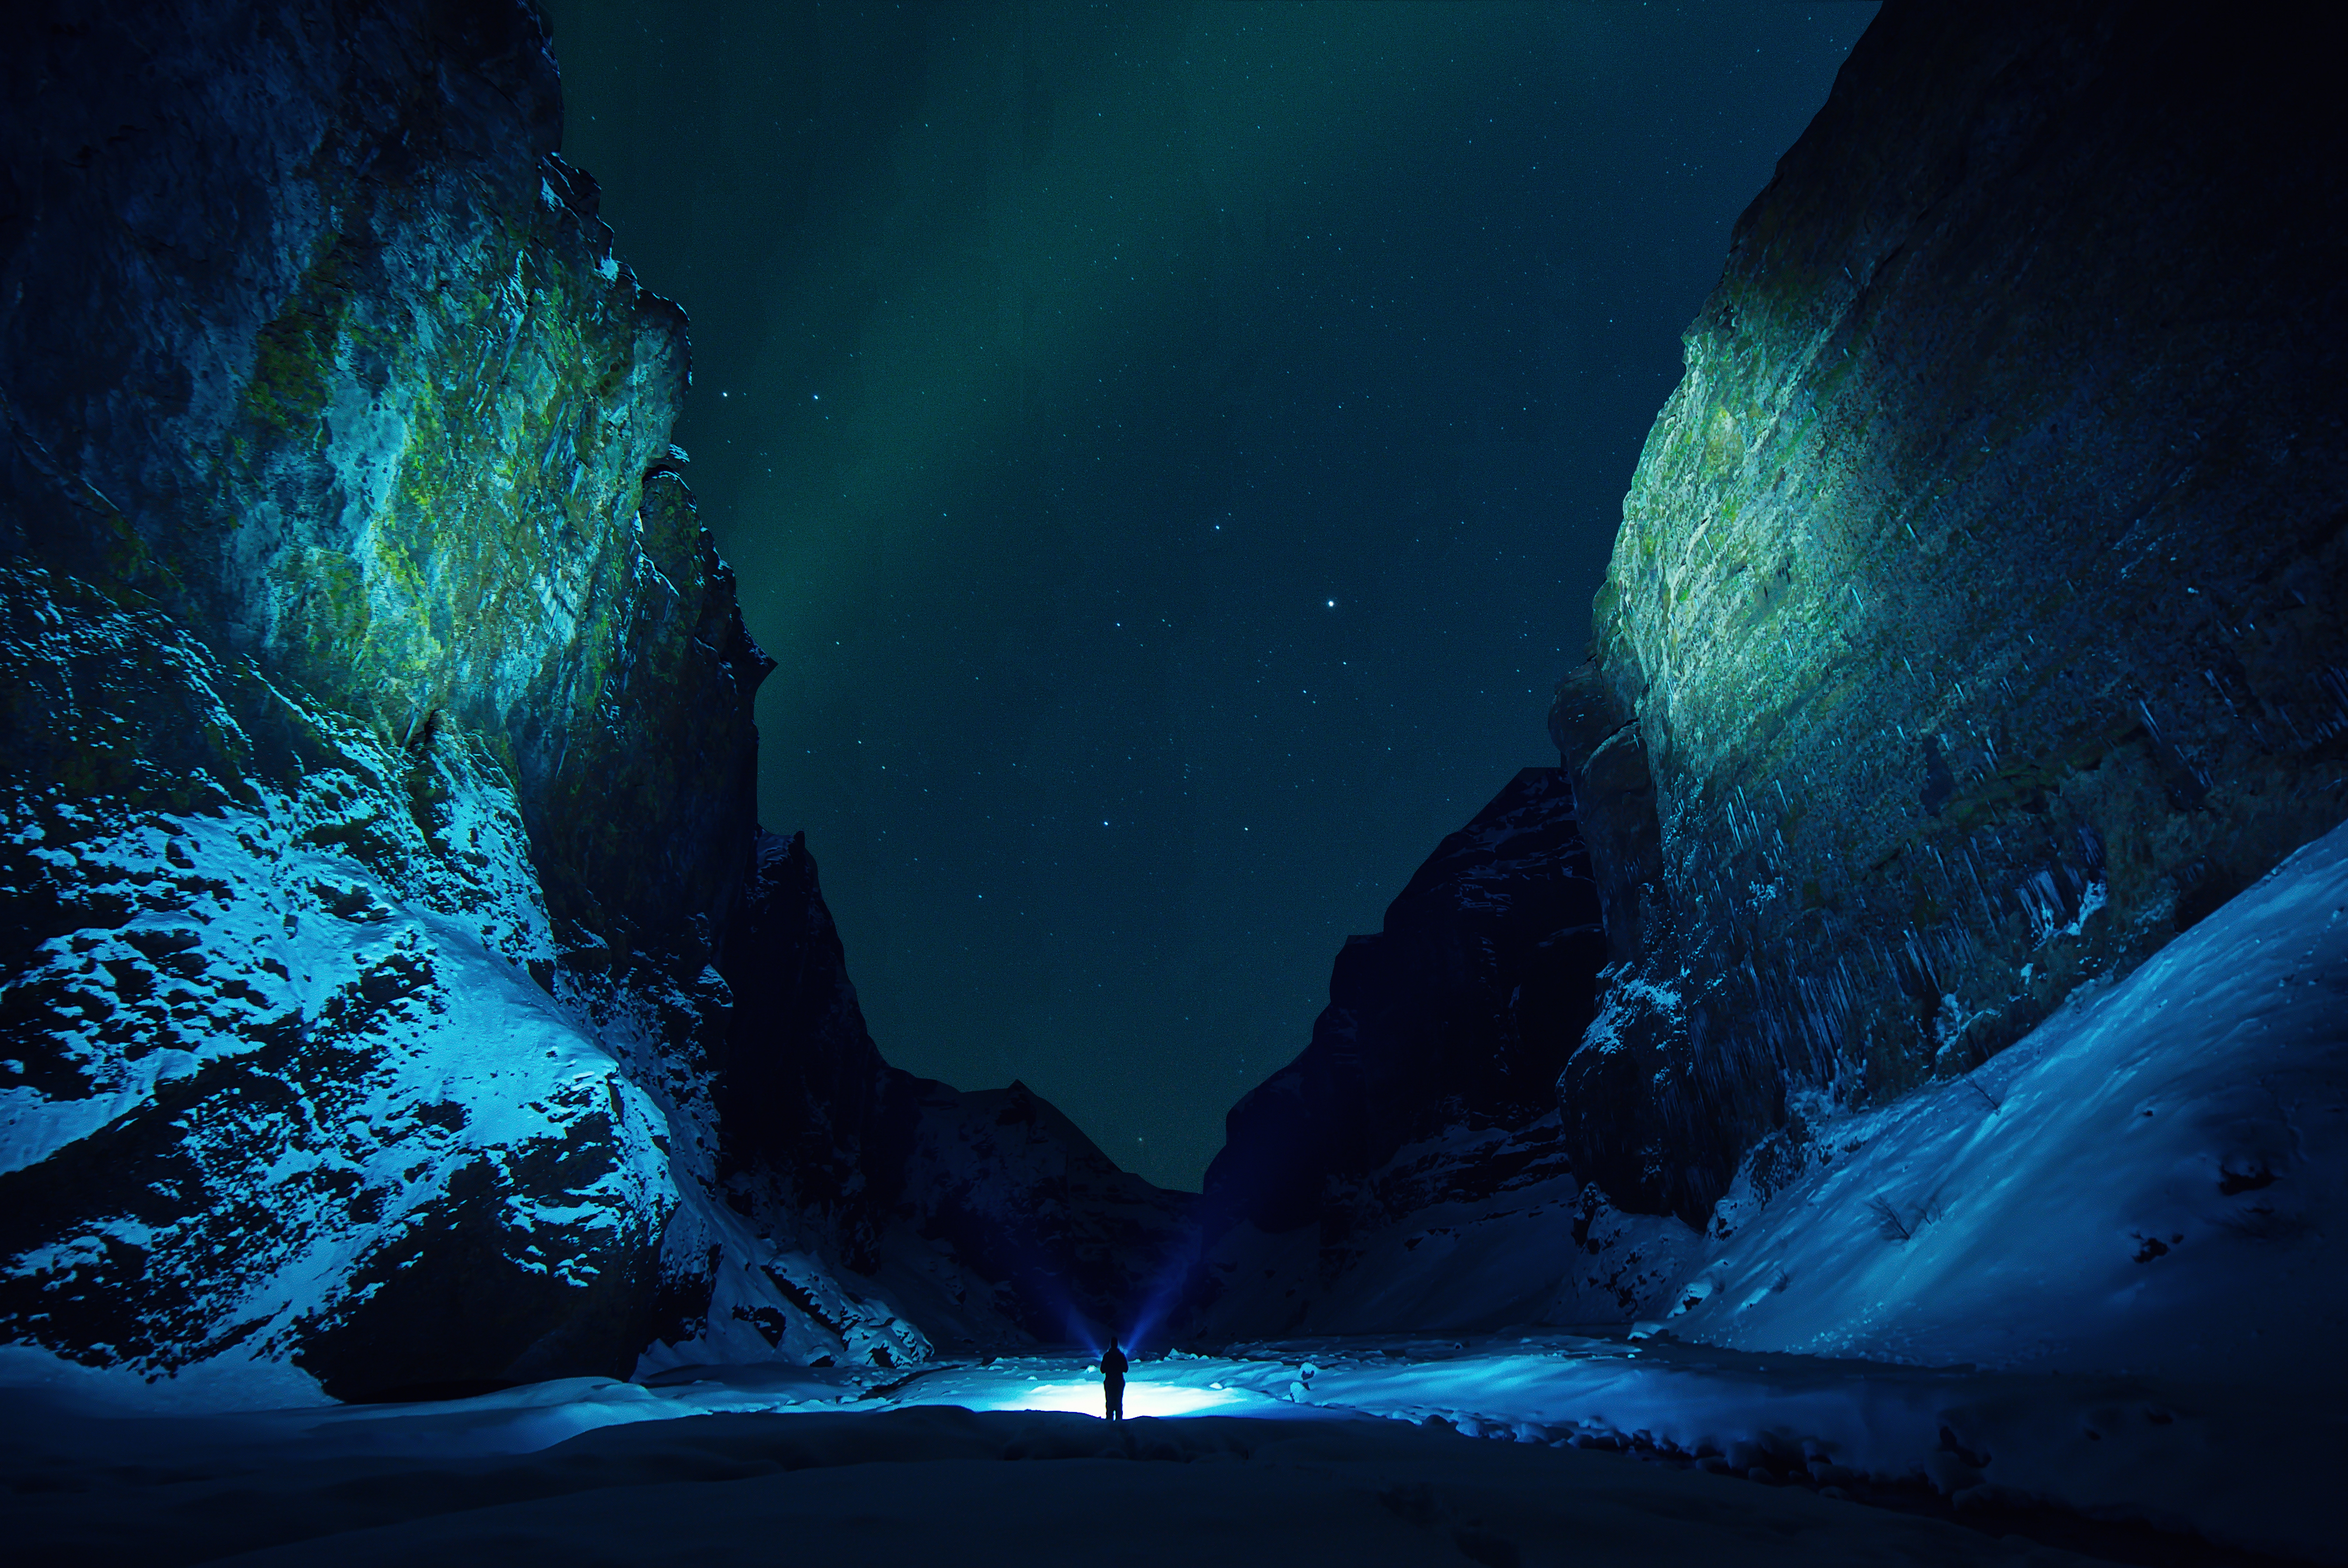 snow, nature, mountains, ice, night, starry sky, ice floes